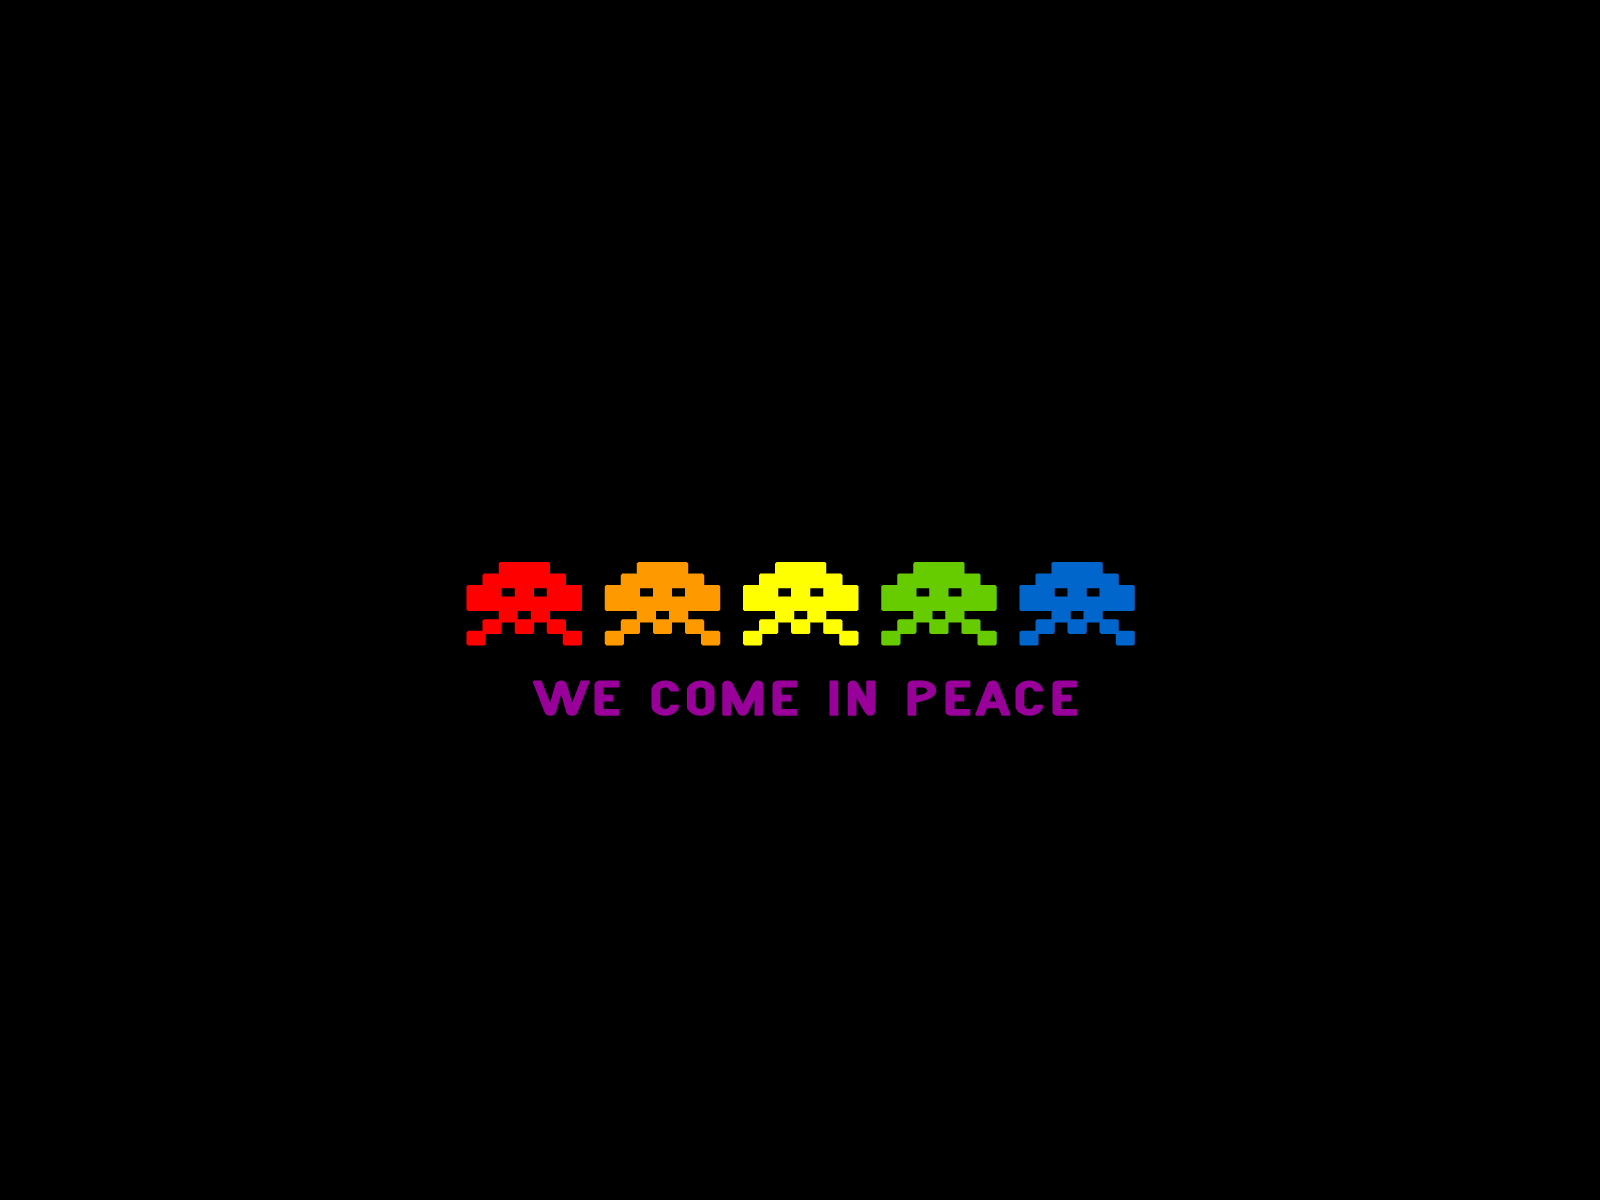 Space Invaders&; “We Come in Peace” Wallpaper